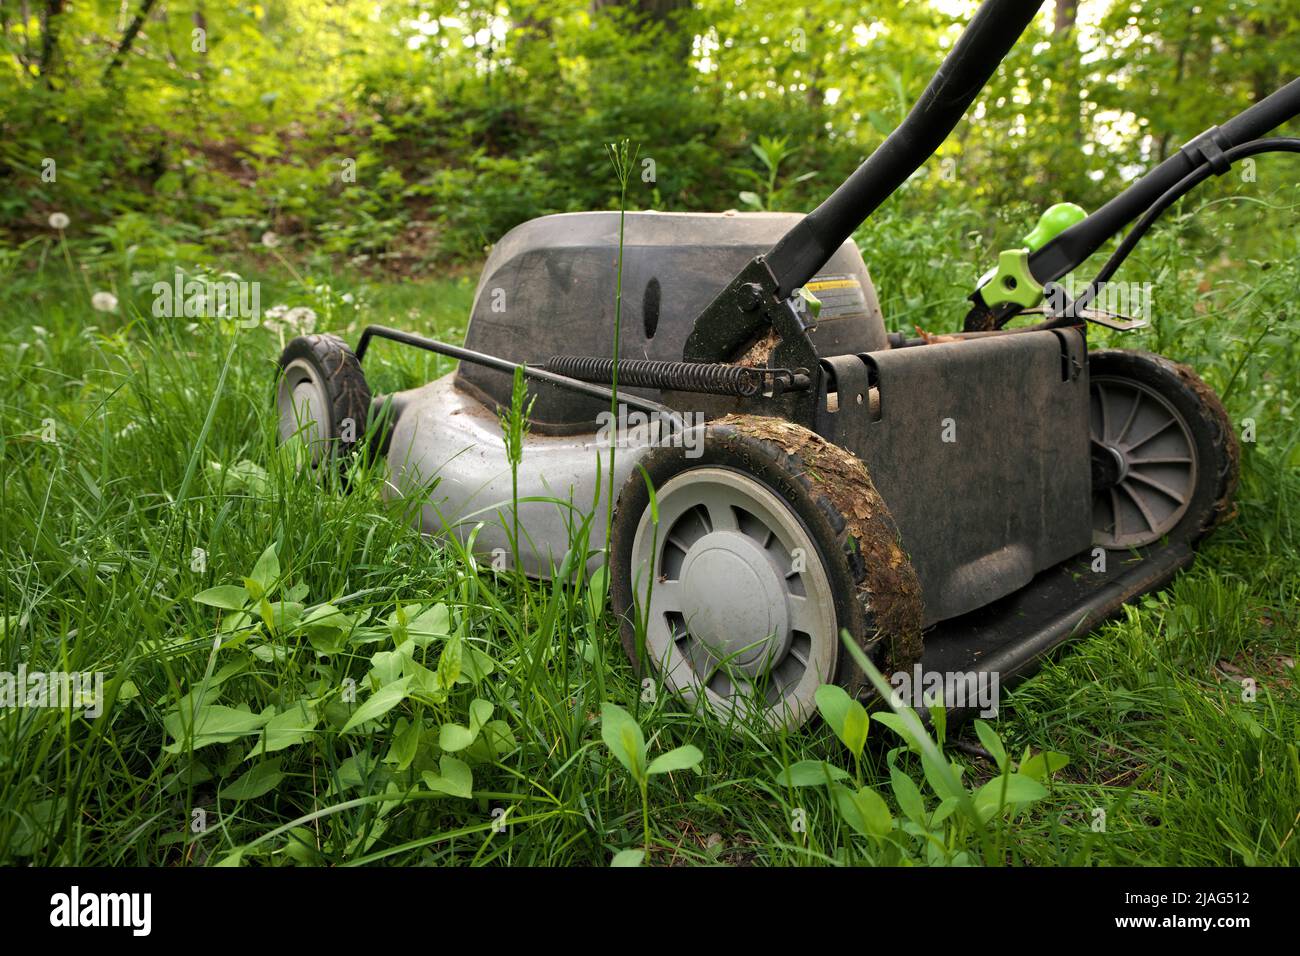 Low Angle Close up lawnmower ready to be cutting long grass or illustrating concept of helping bees Stock Photo